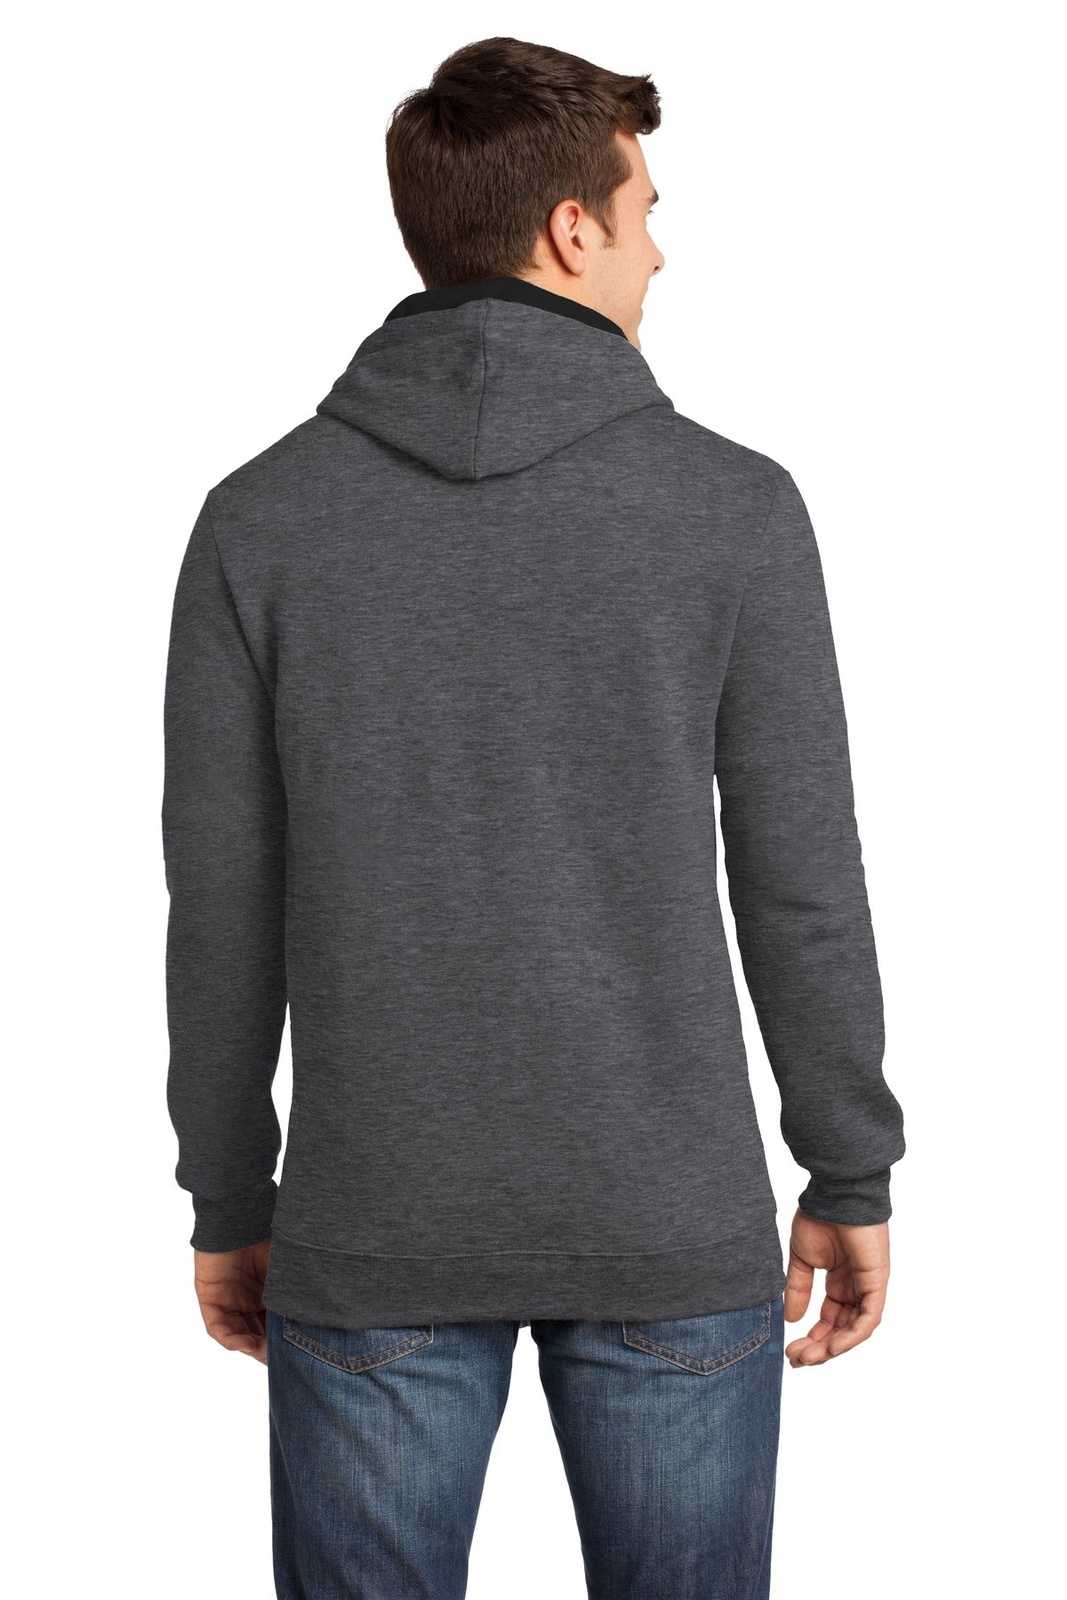 District DT810 The Concert Fleece Hoodie - Heathered Charcoal - HIT a Double - 2